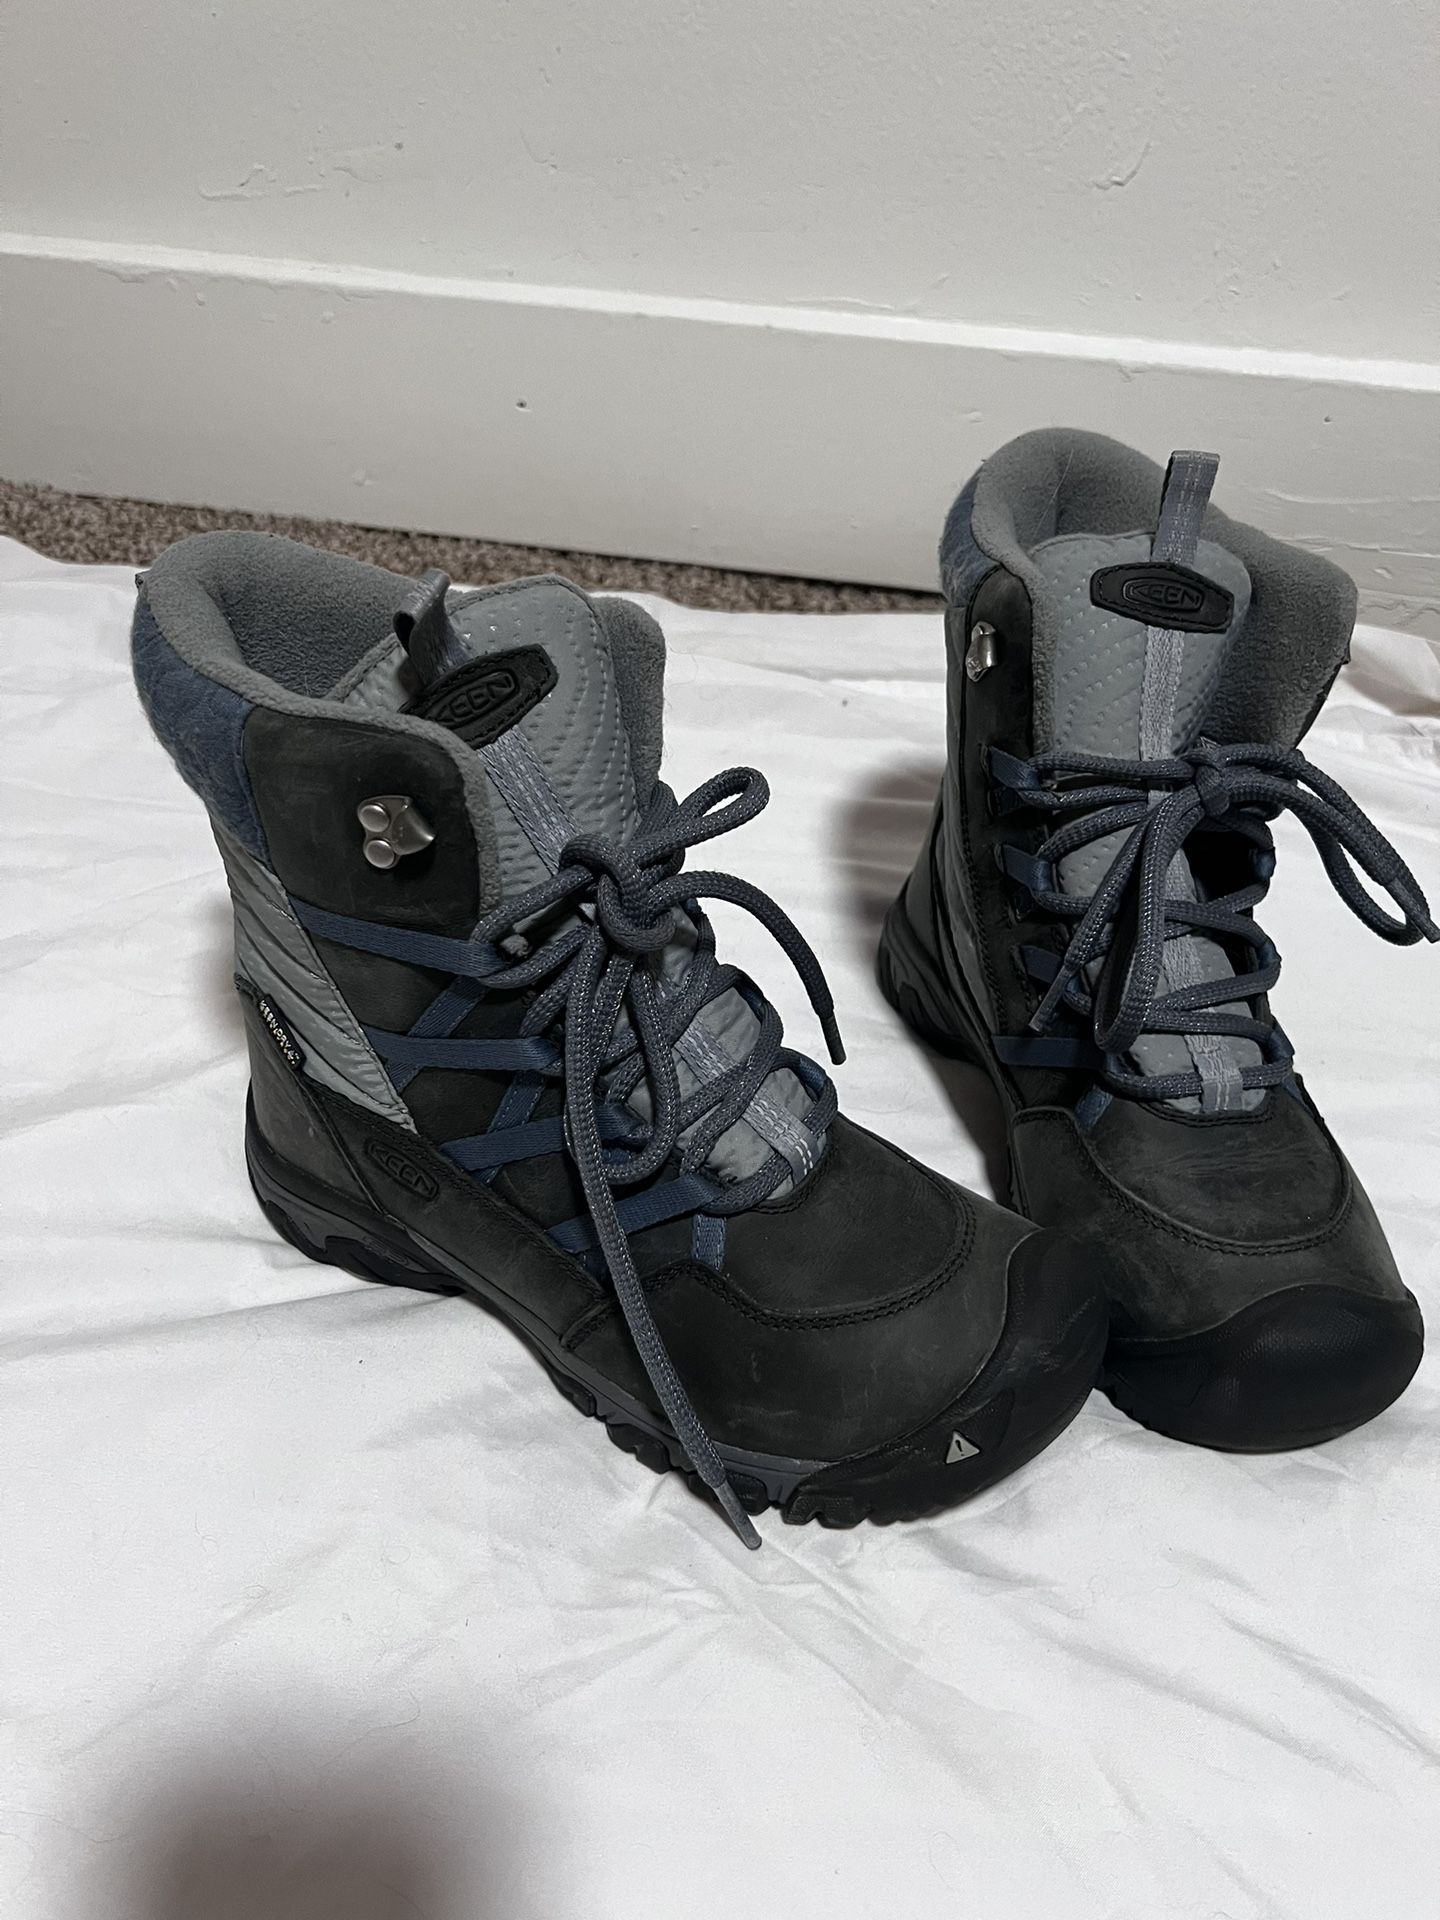 Keen Snow Boots Size 6-6.5